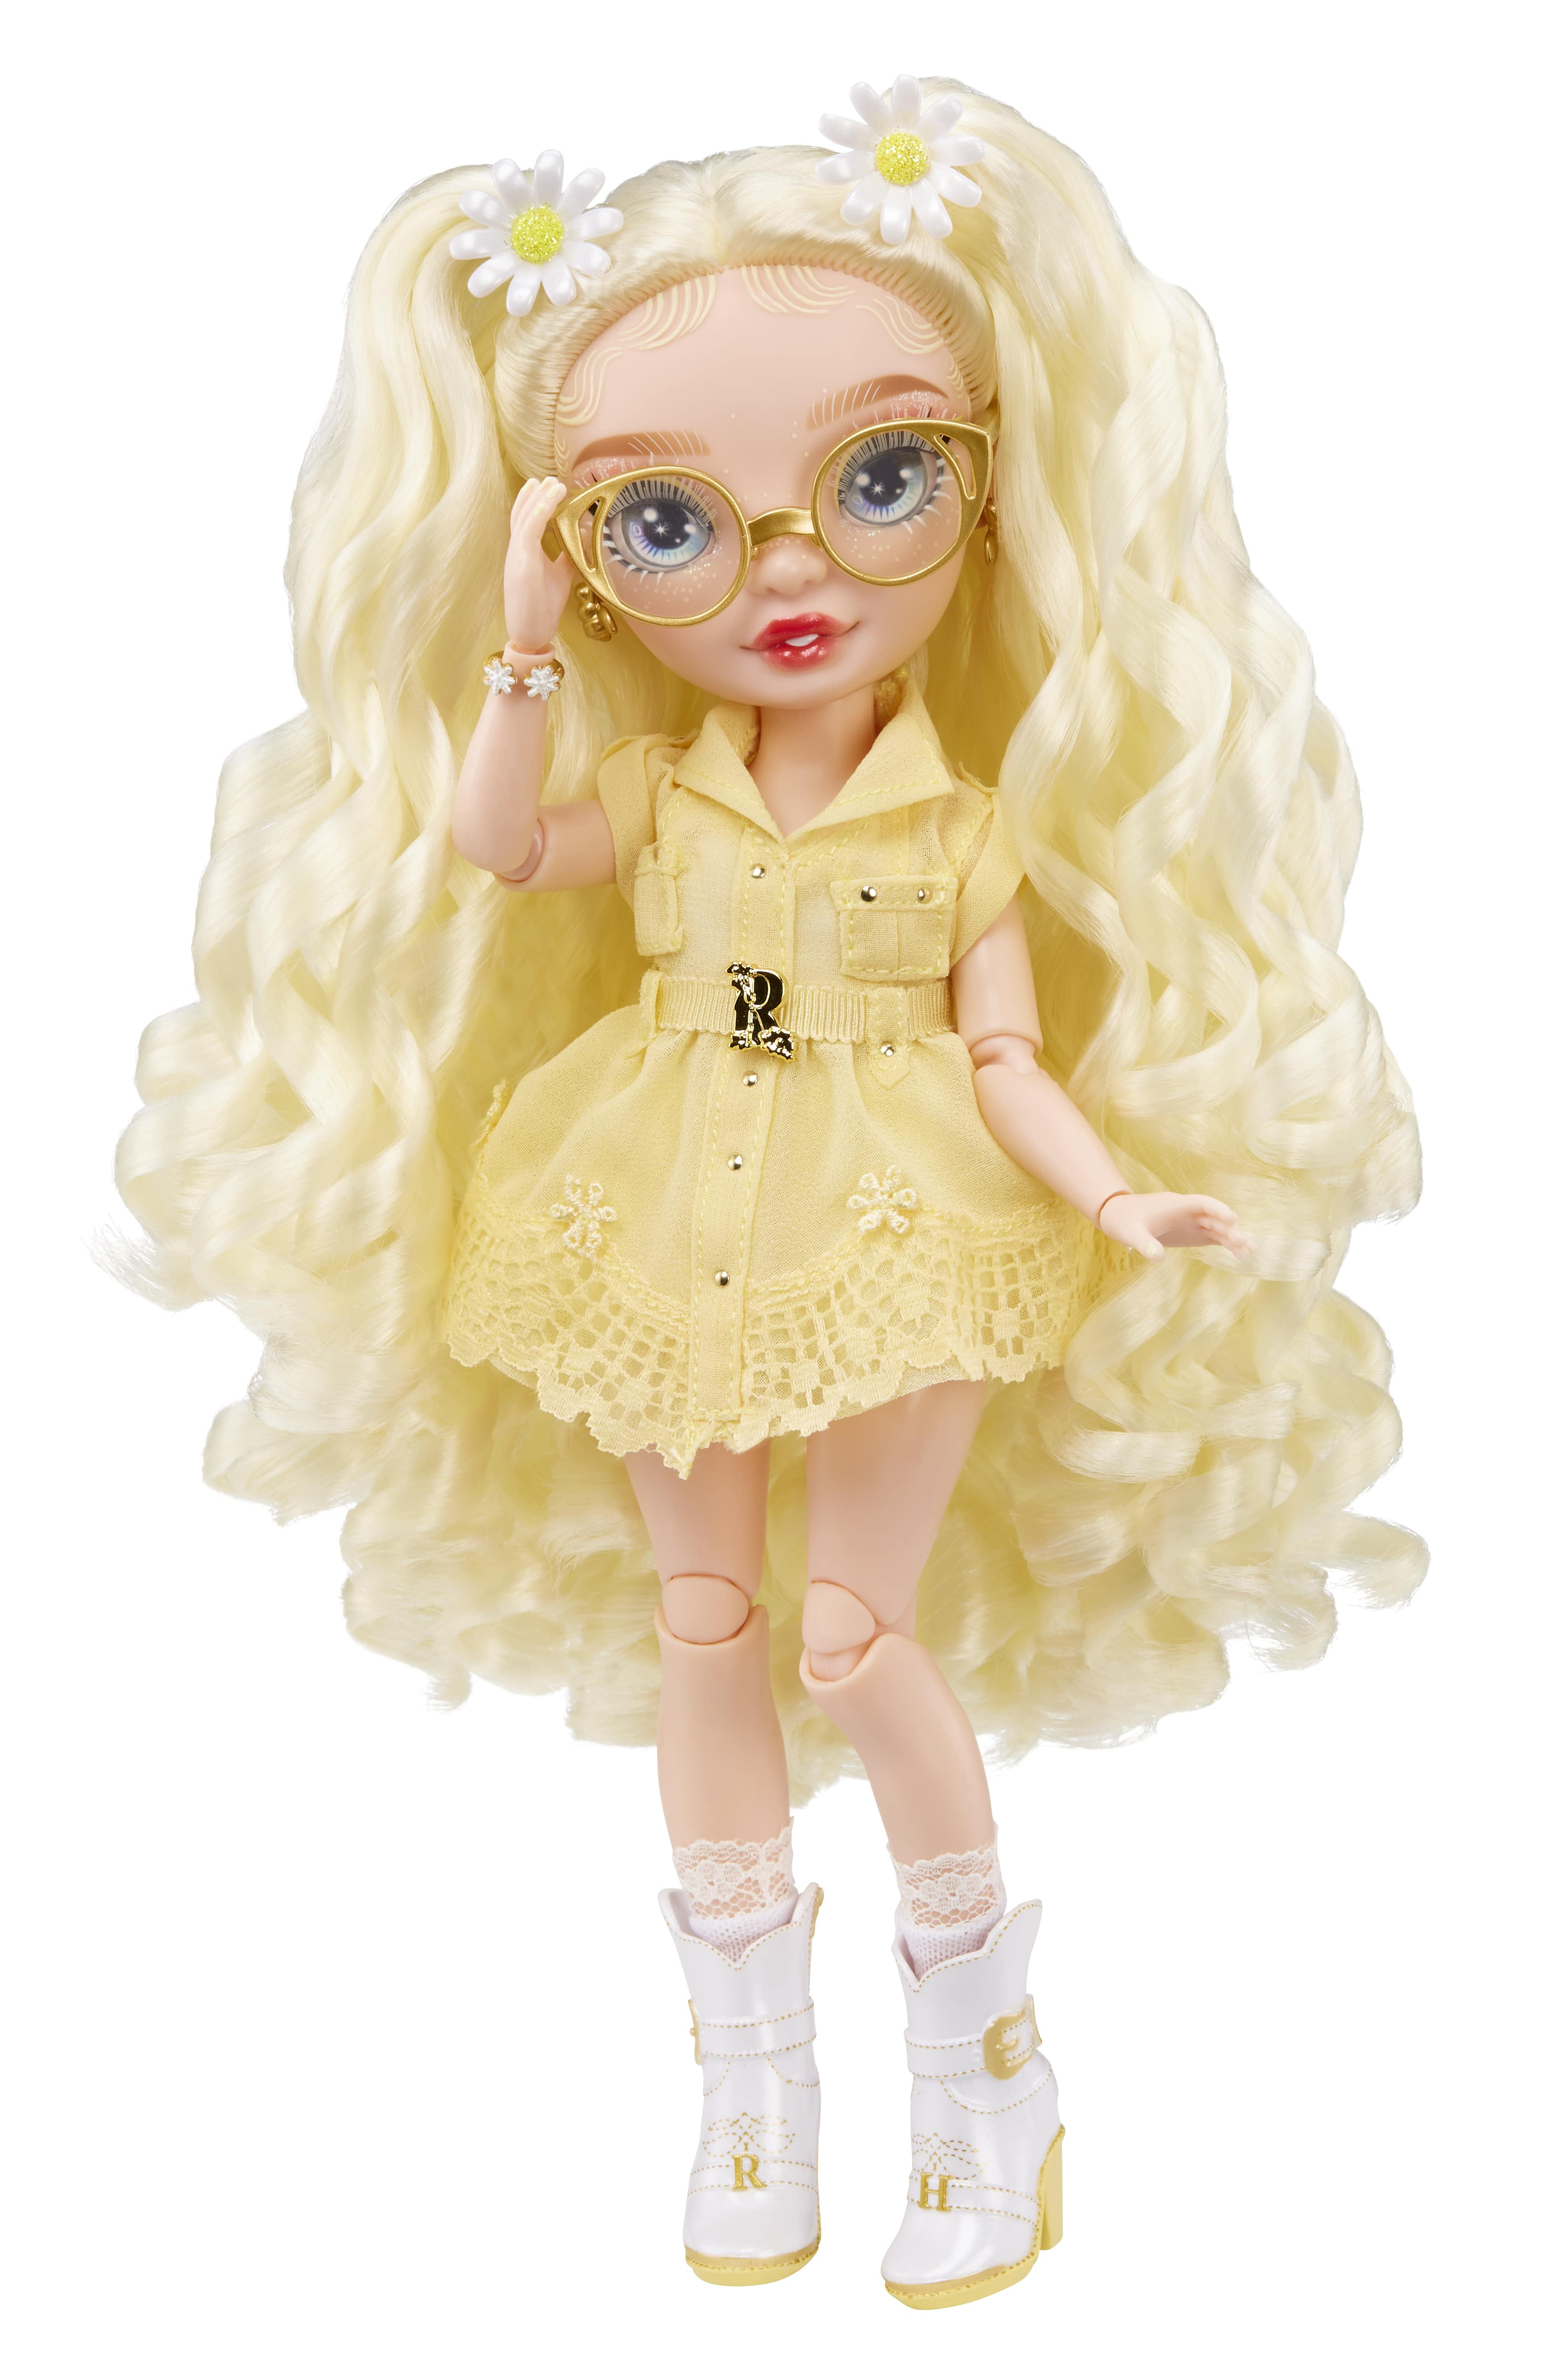 Rainbow High Delilah Fields- Buttercup Yellow Fashion Doll with Albinism & Glasses. 2 Designer Outfits to Mix & Match with Accessories, Great Gift for Kids 6-12 Years Old and Collectors